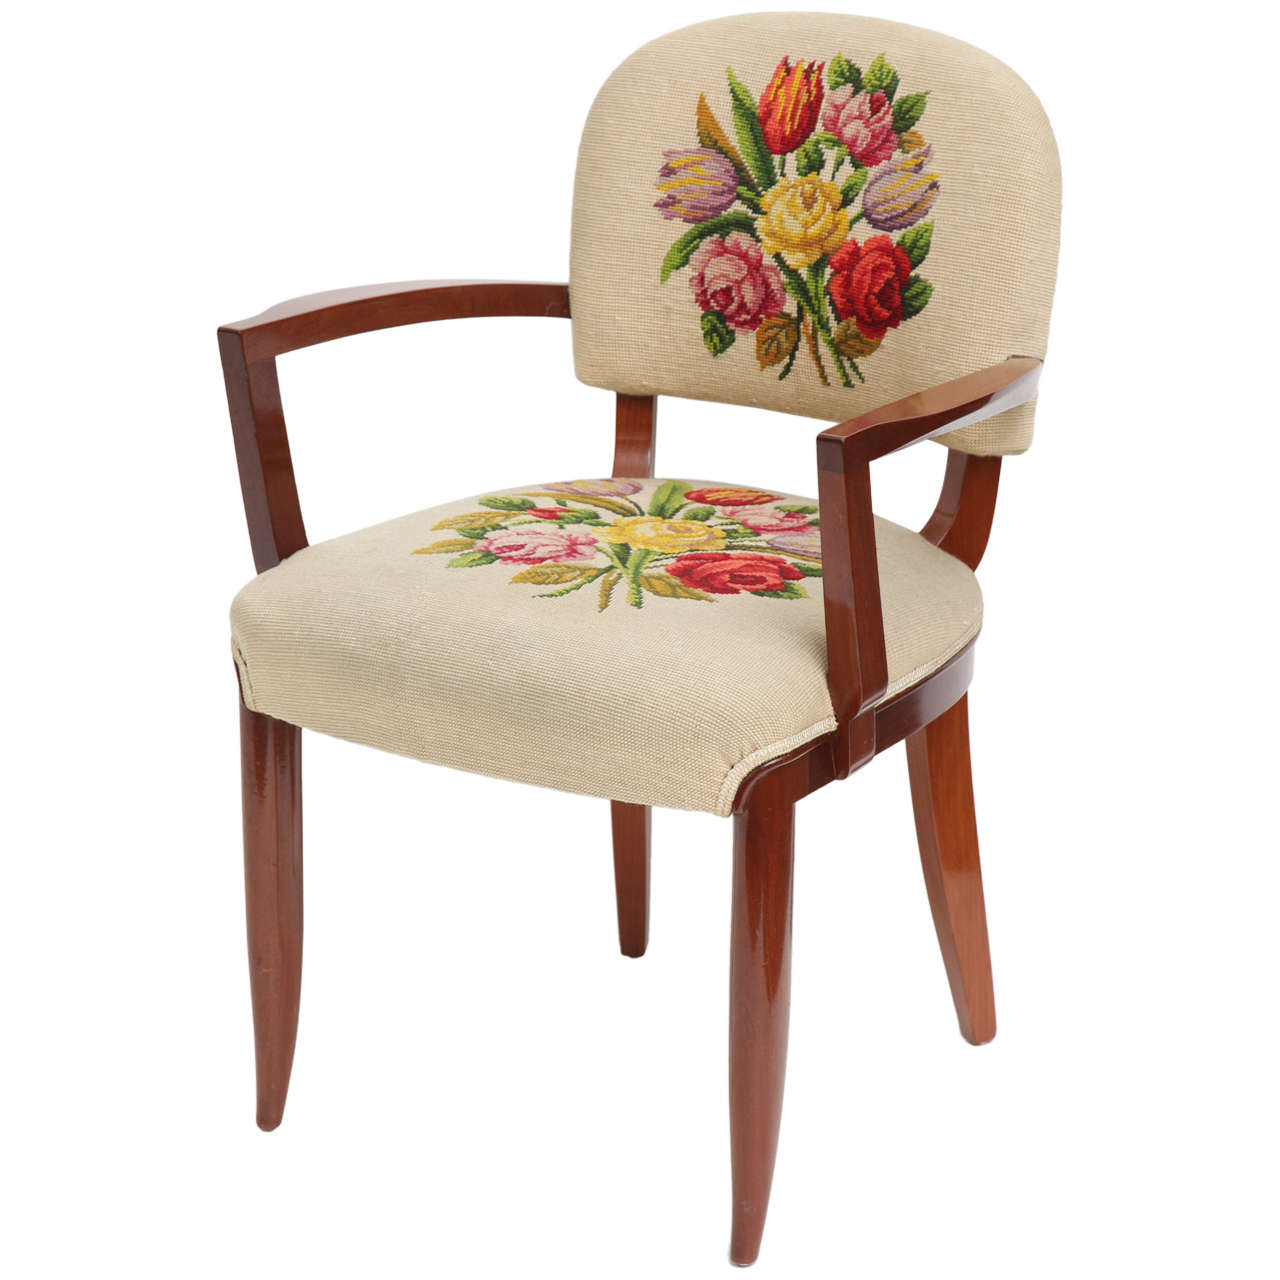 Armchair with Original Embroidered Upholstery by Jules Leleu